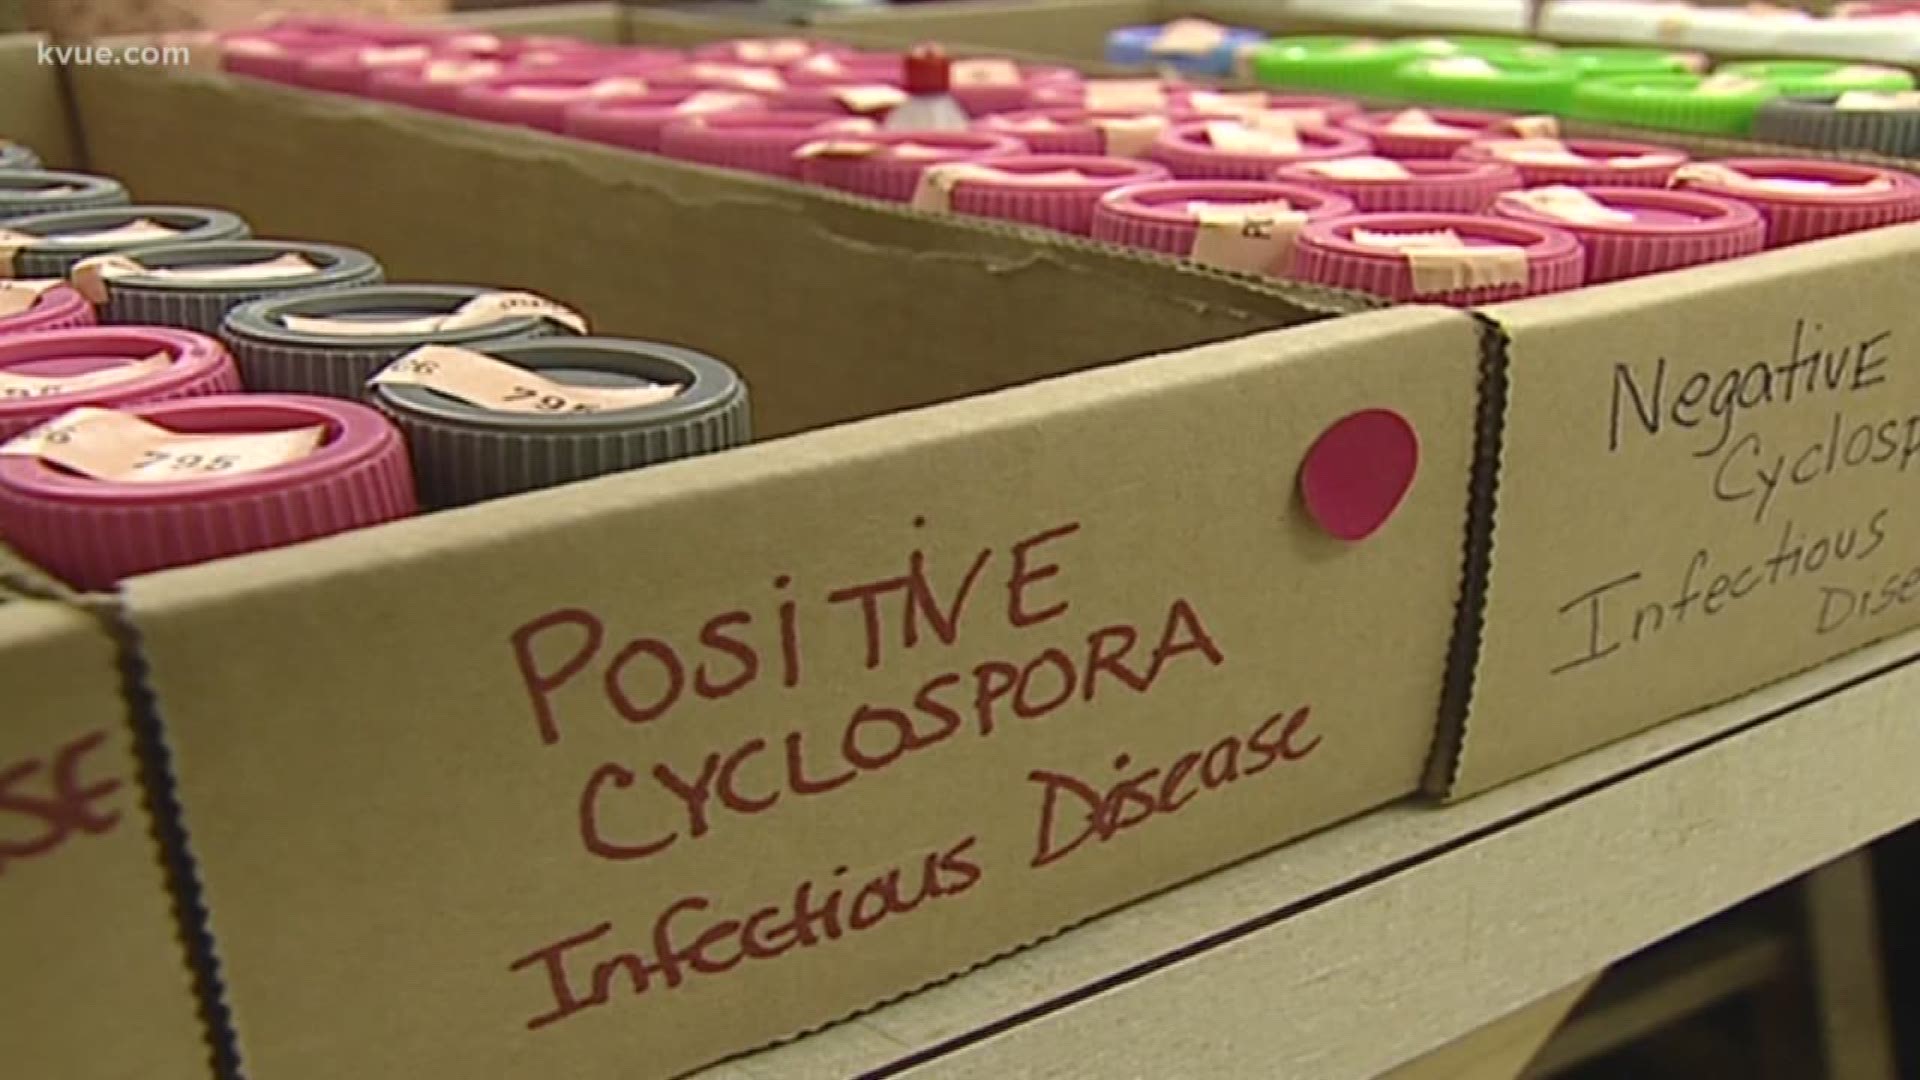 An outbreak of the parasite known as Cyclospora is getting worse in Travis County.